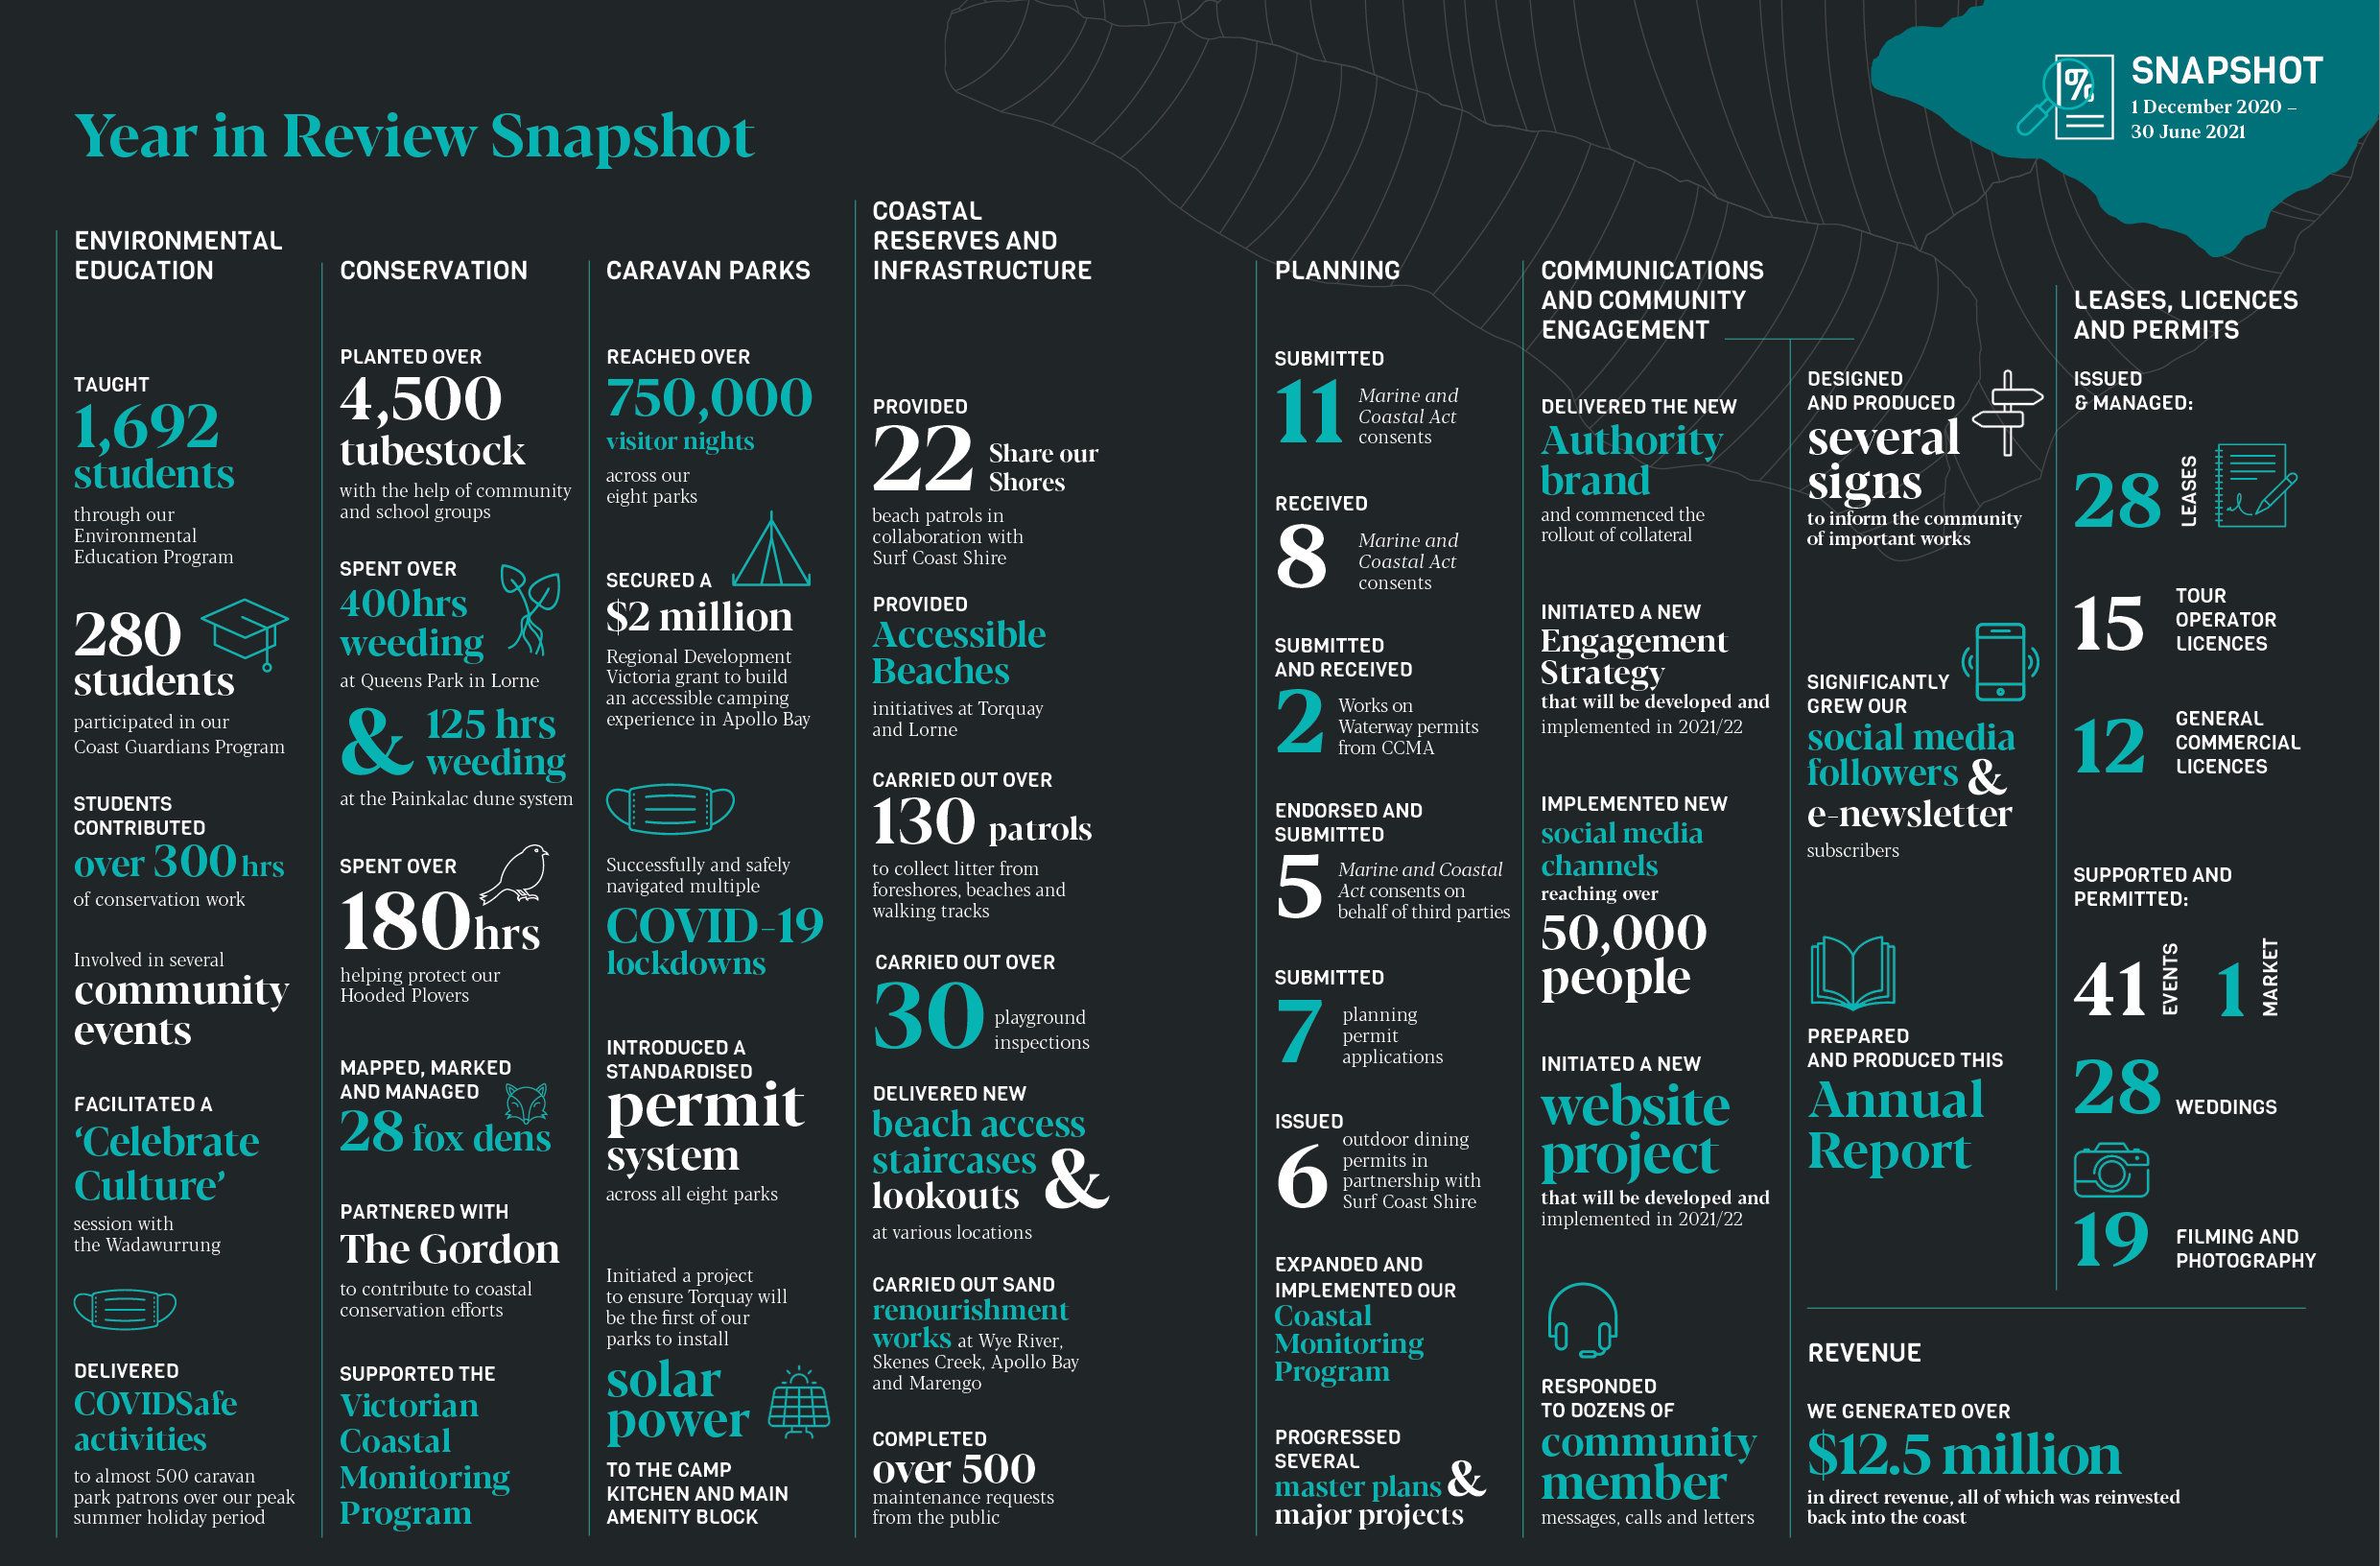 An infographic overview of the Great Ocean Road Coast and Parks Authority's year in review.